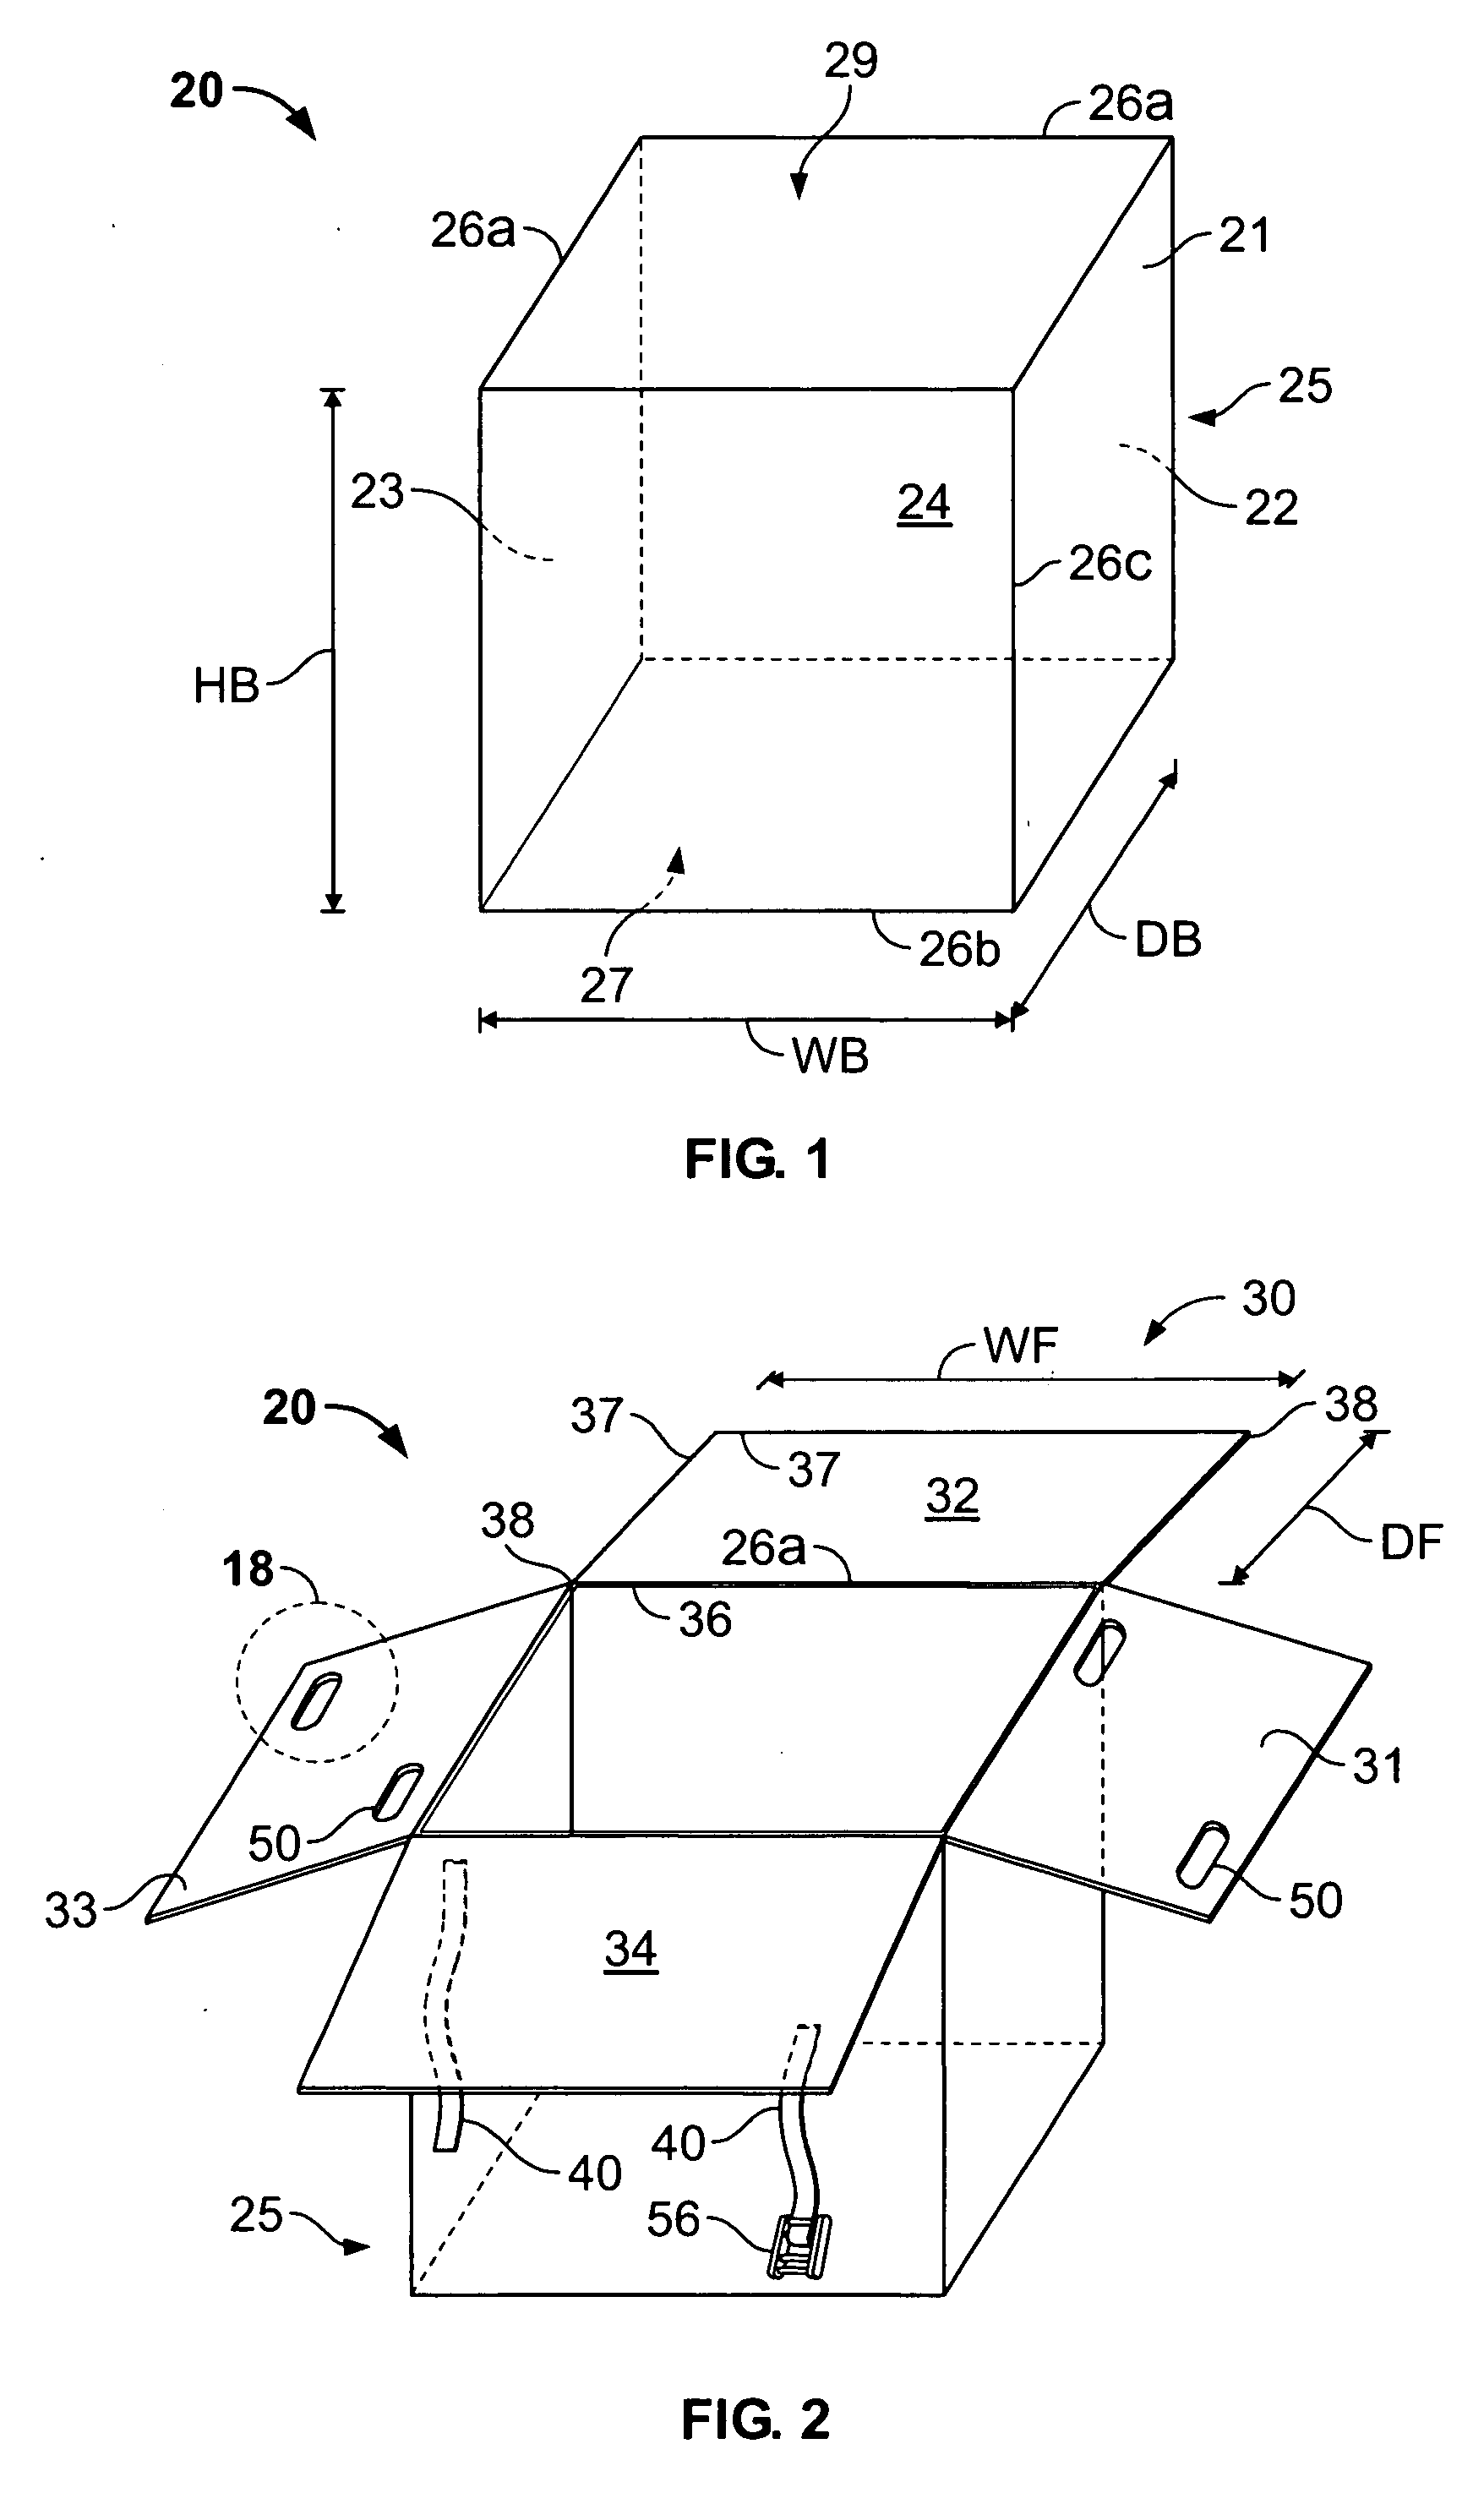 Shoreline erosion and flood control system and method